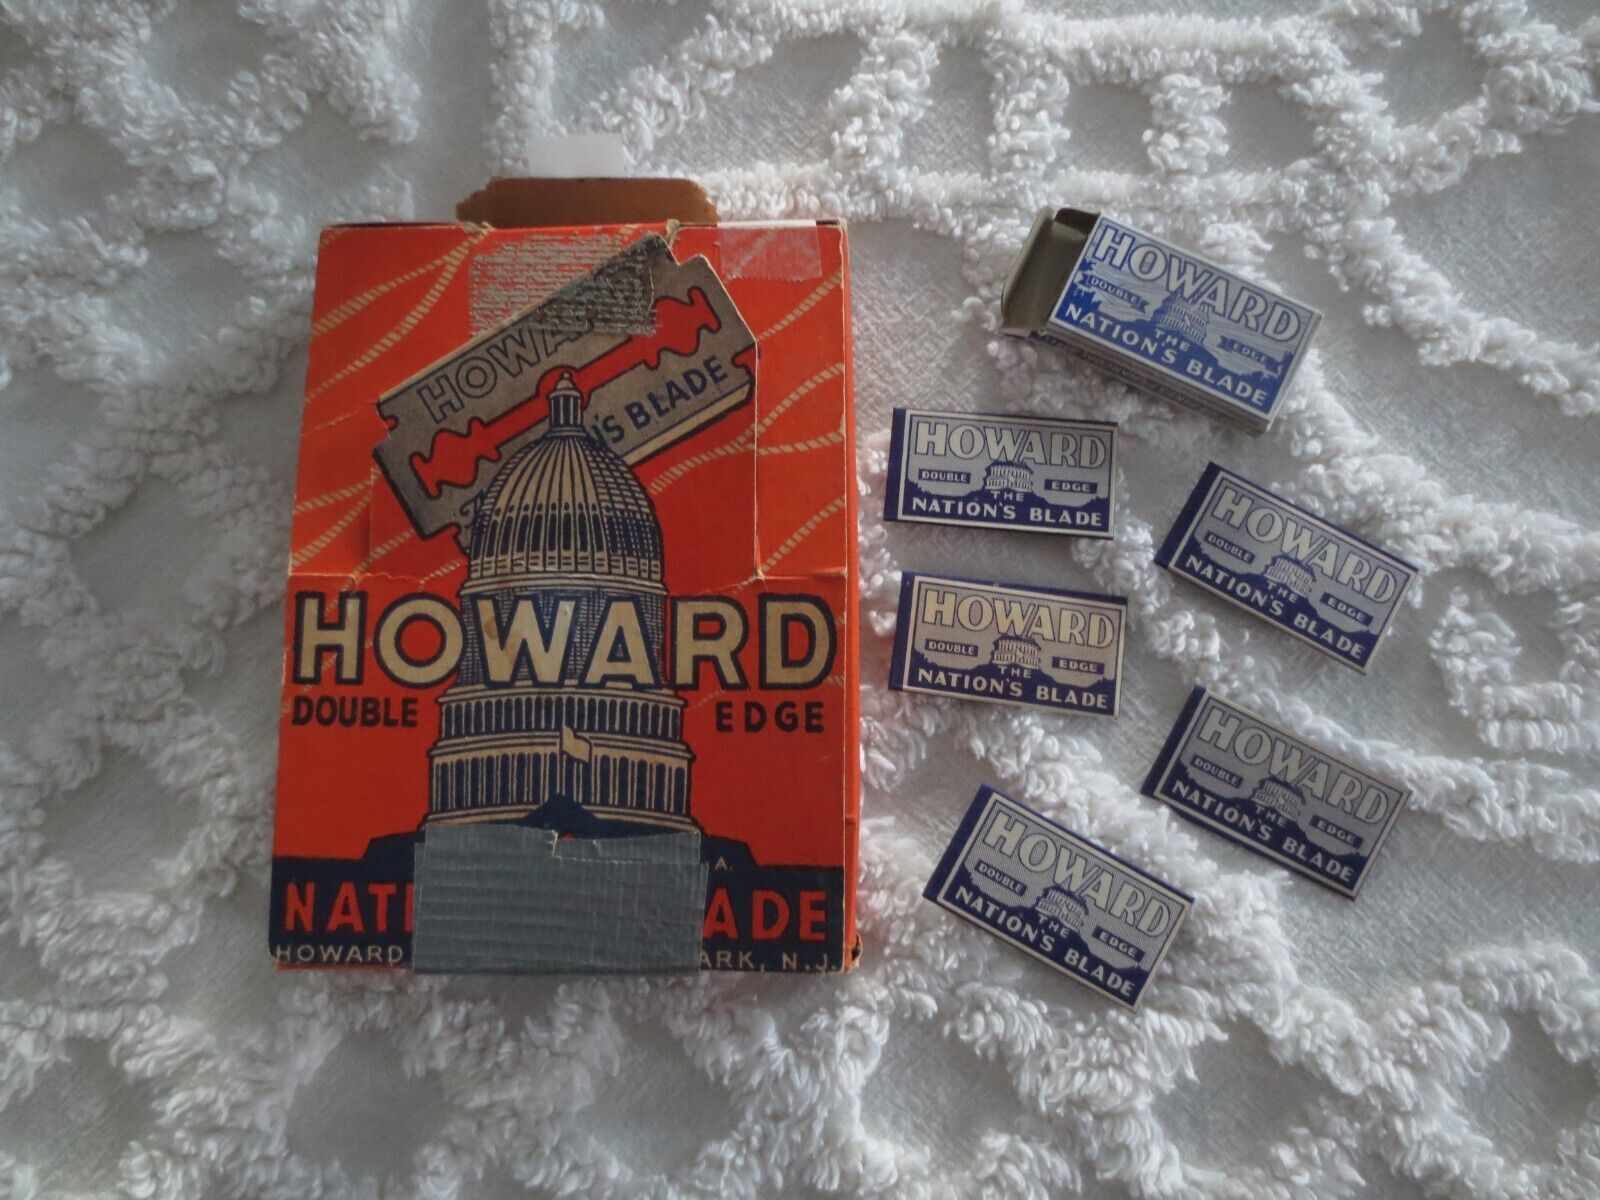 Primary image for 1930's Howard DOUBLE EDGE BLADES - 15 - 5 Blade Packages w/Original Box